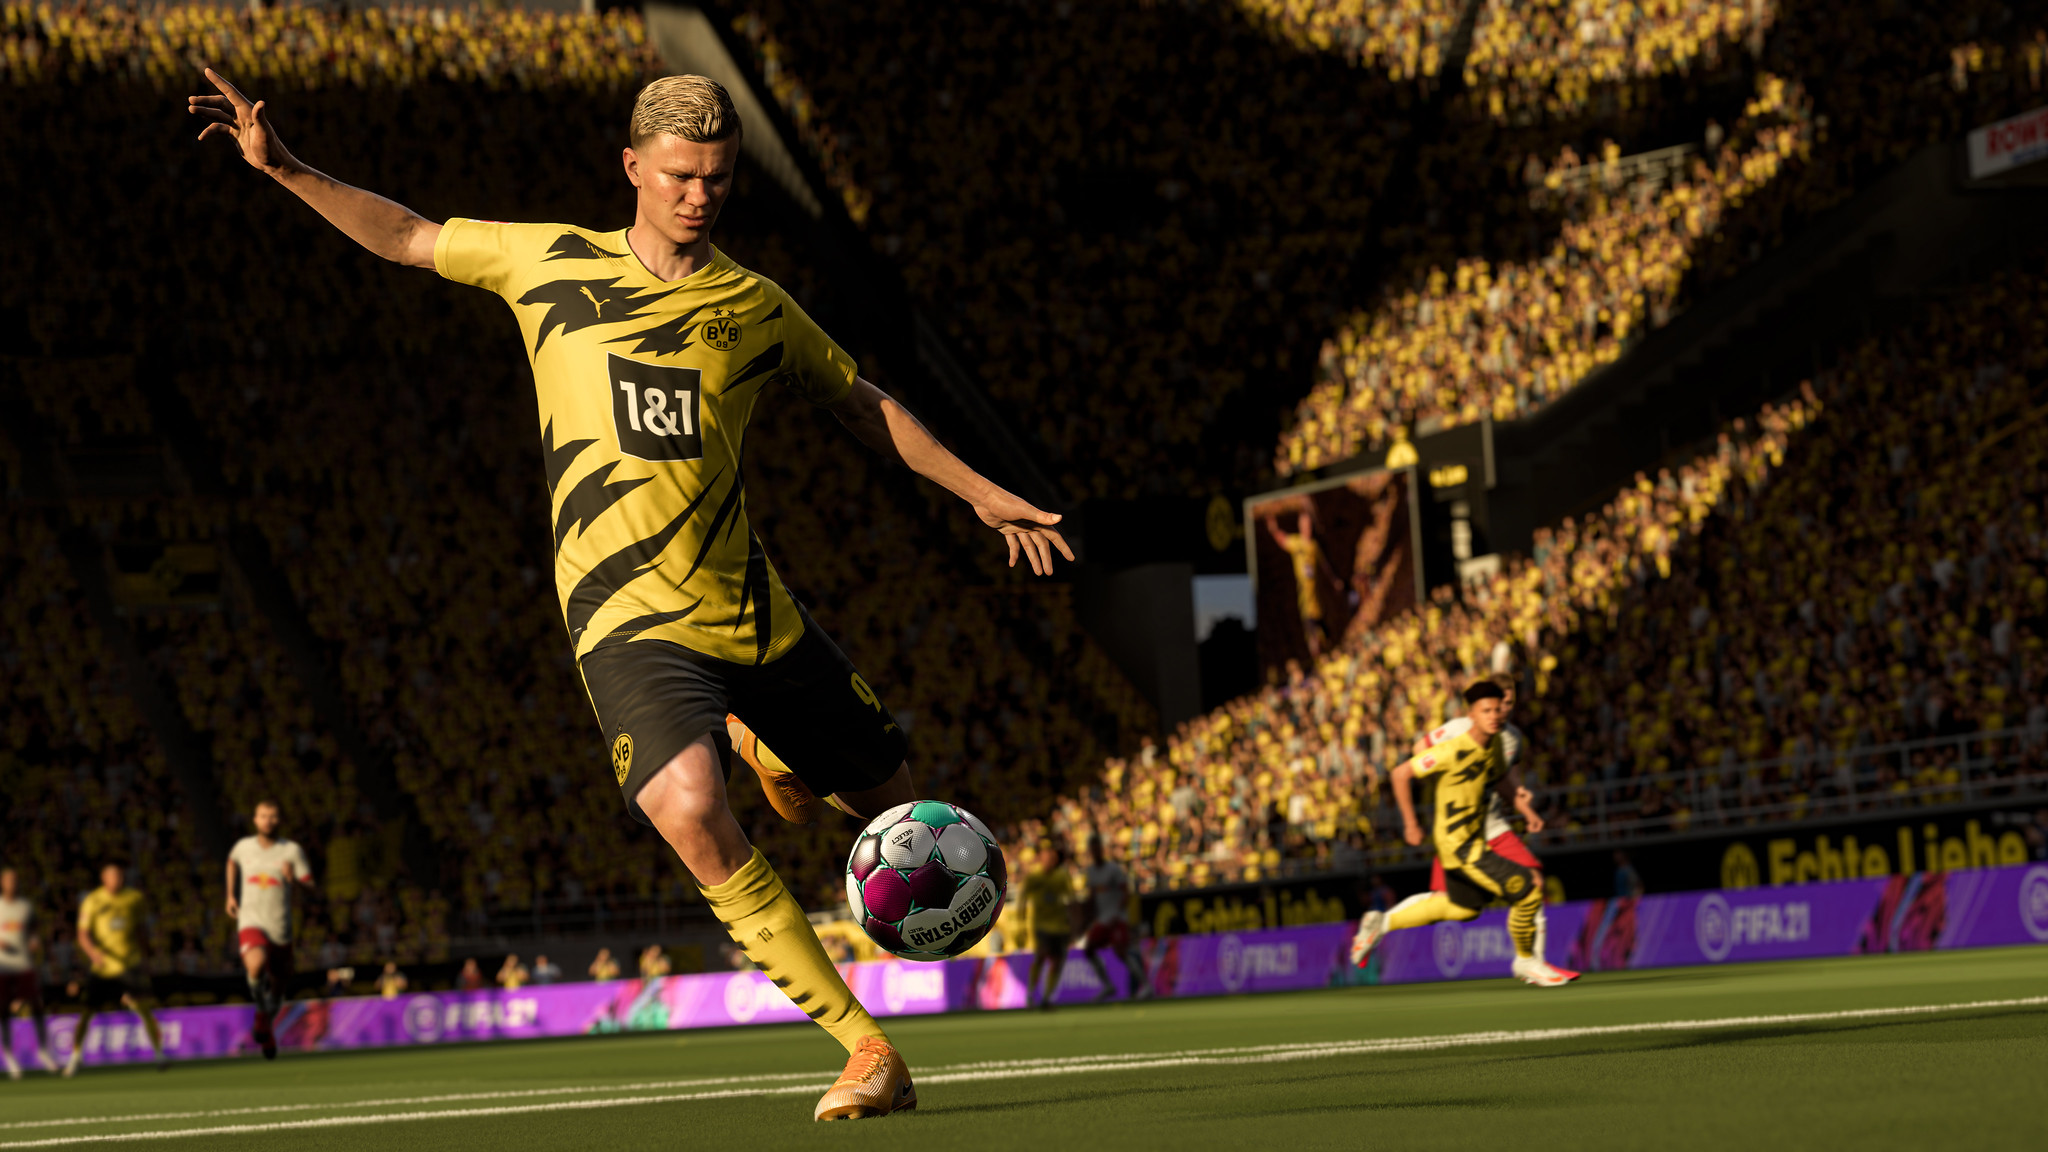 FIFA 21 for PS5 uses DualSense’s adaptive triggers to convey stamina